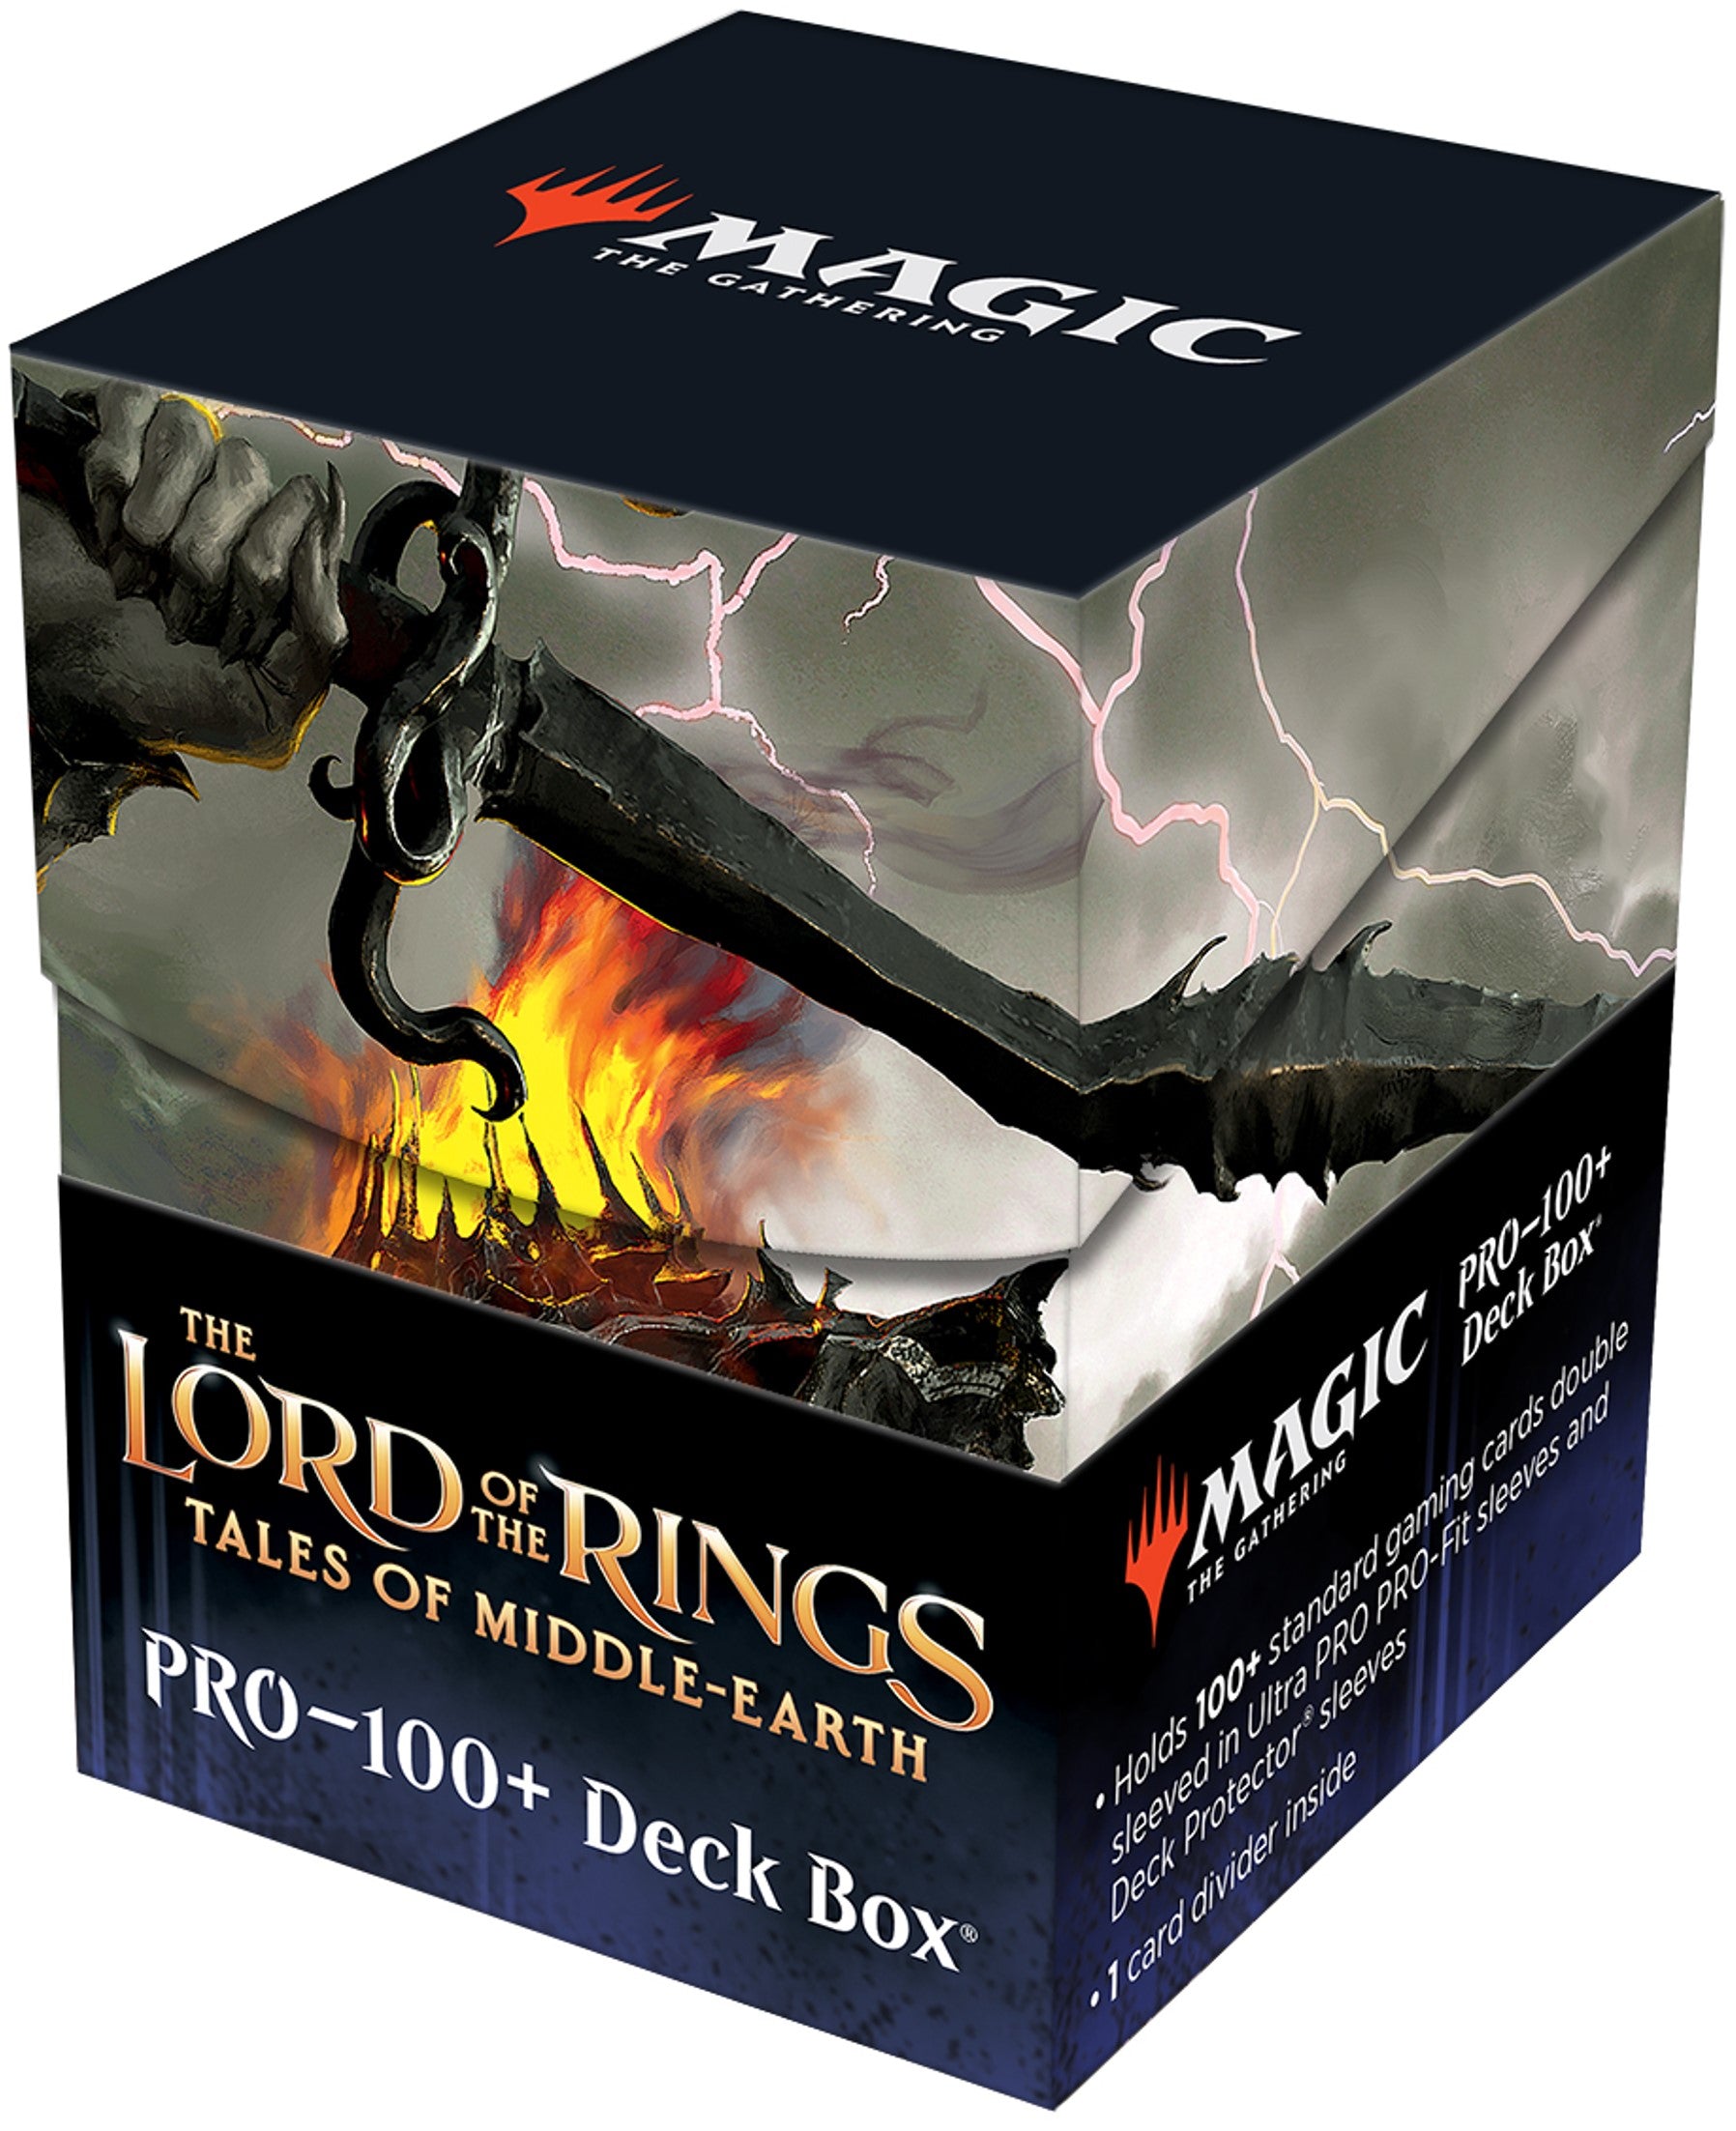 Pro-100+ Deck Box Lord of the Rings: SAURON | North of Exile Games